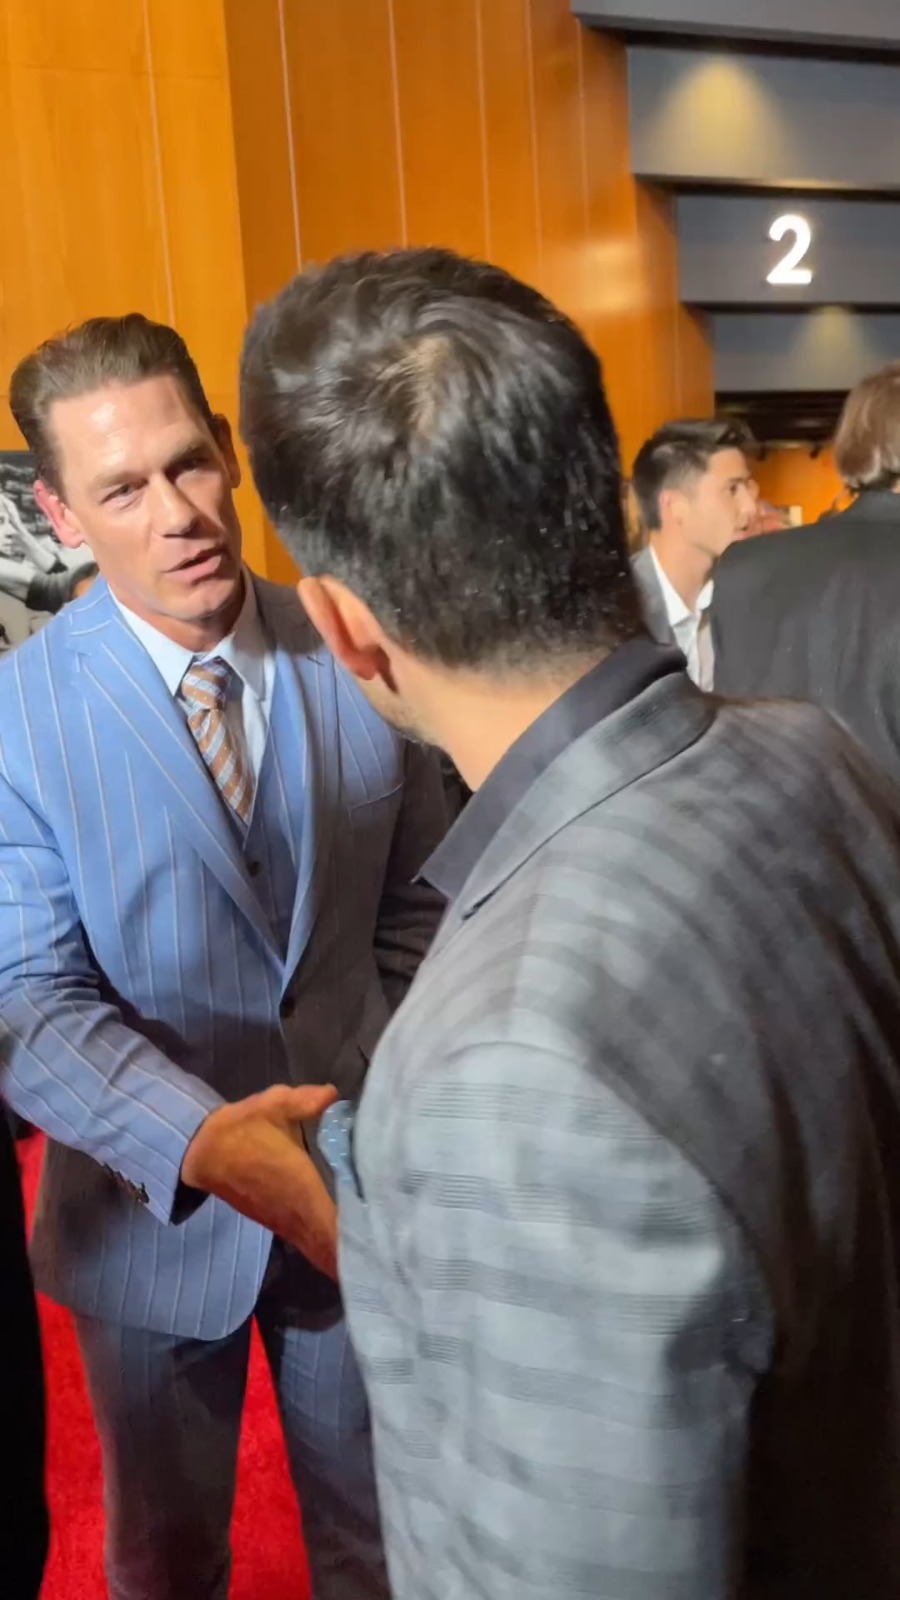 Watching John Cena make time for everyone at the Iron Claw premiere last night really speaks to the kind of person he is